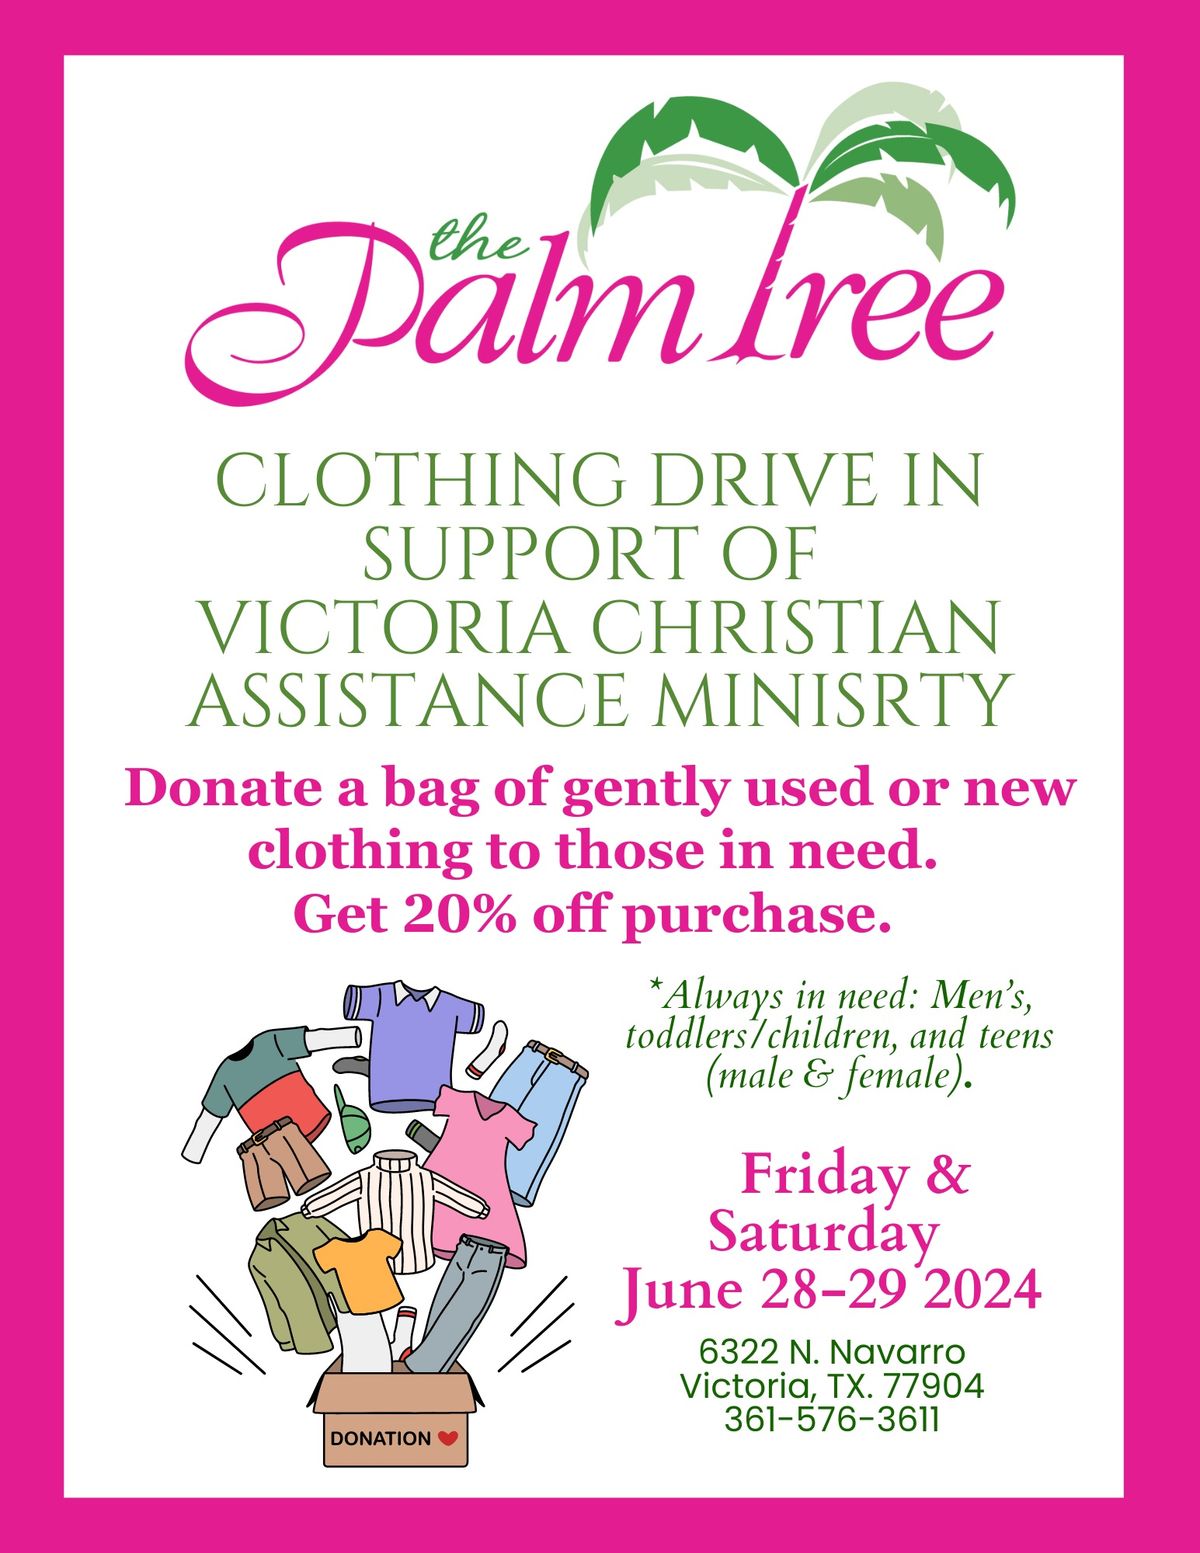 Victoria Christian Assistance Ministry Clothing Drive